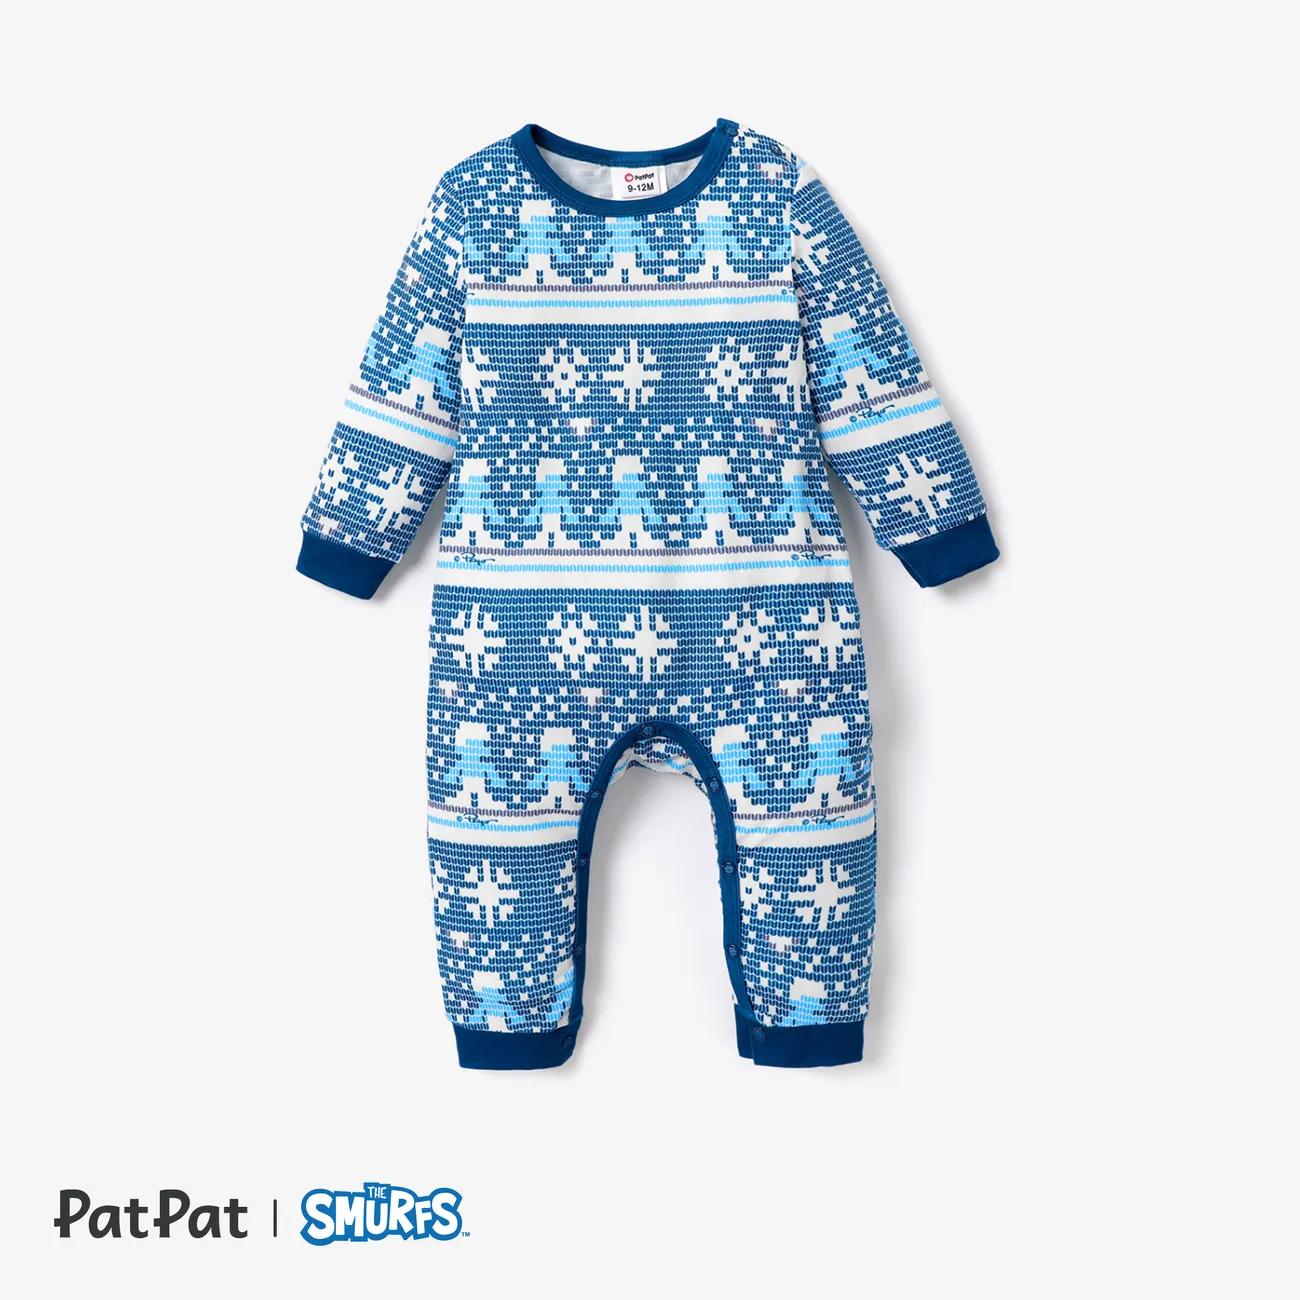 The Smurfs Baby Boy/Girl Graphic/Allover Print Long-sleeve Onesies Deep Blue big image 1